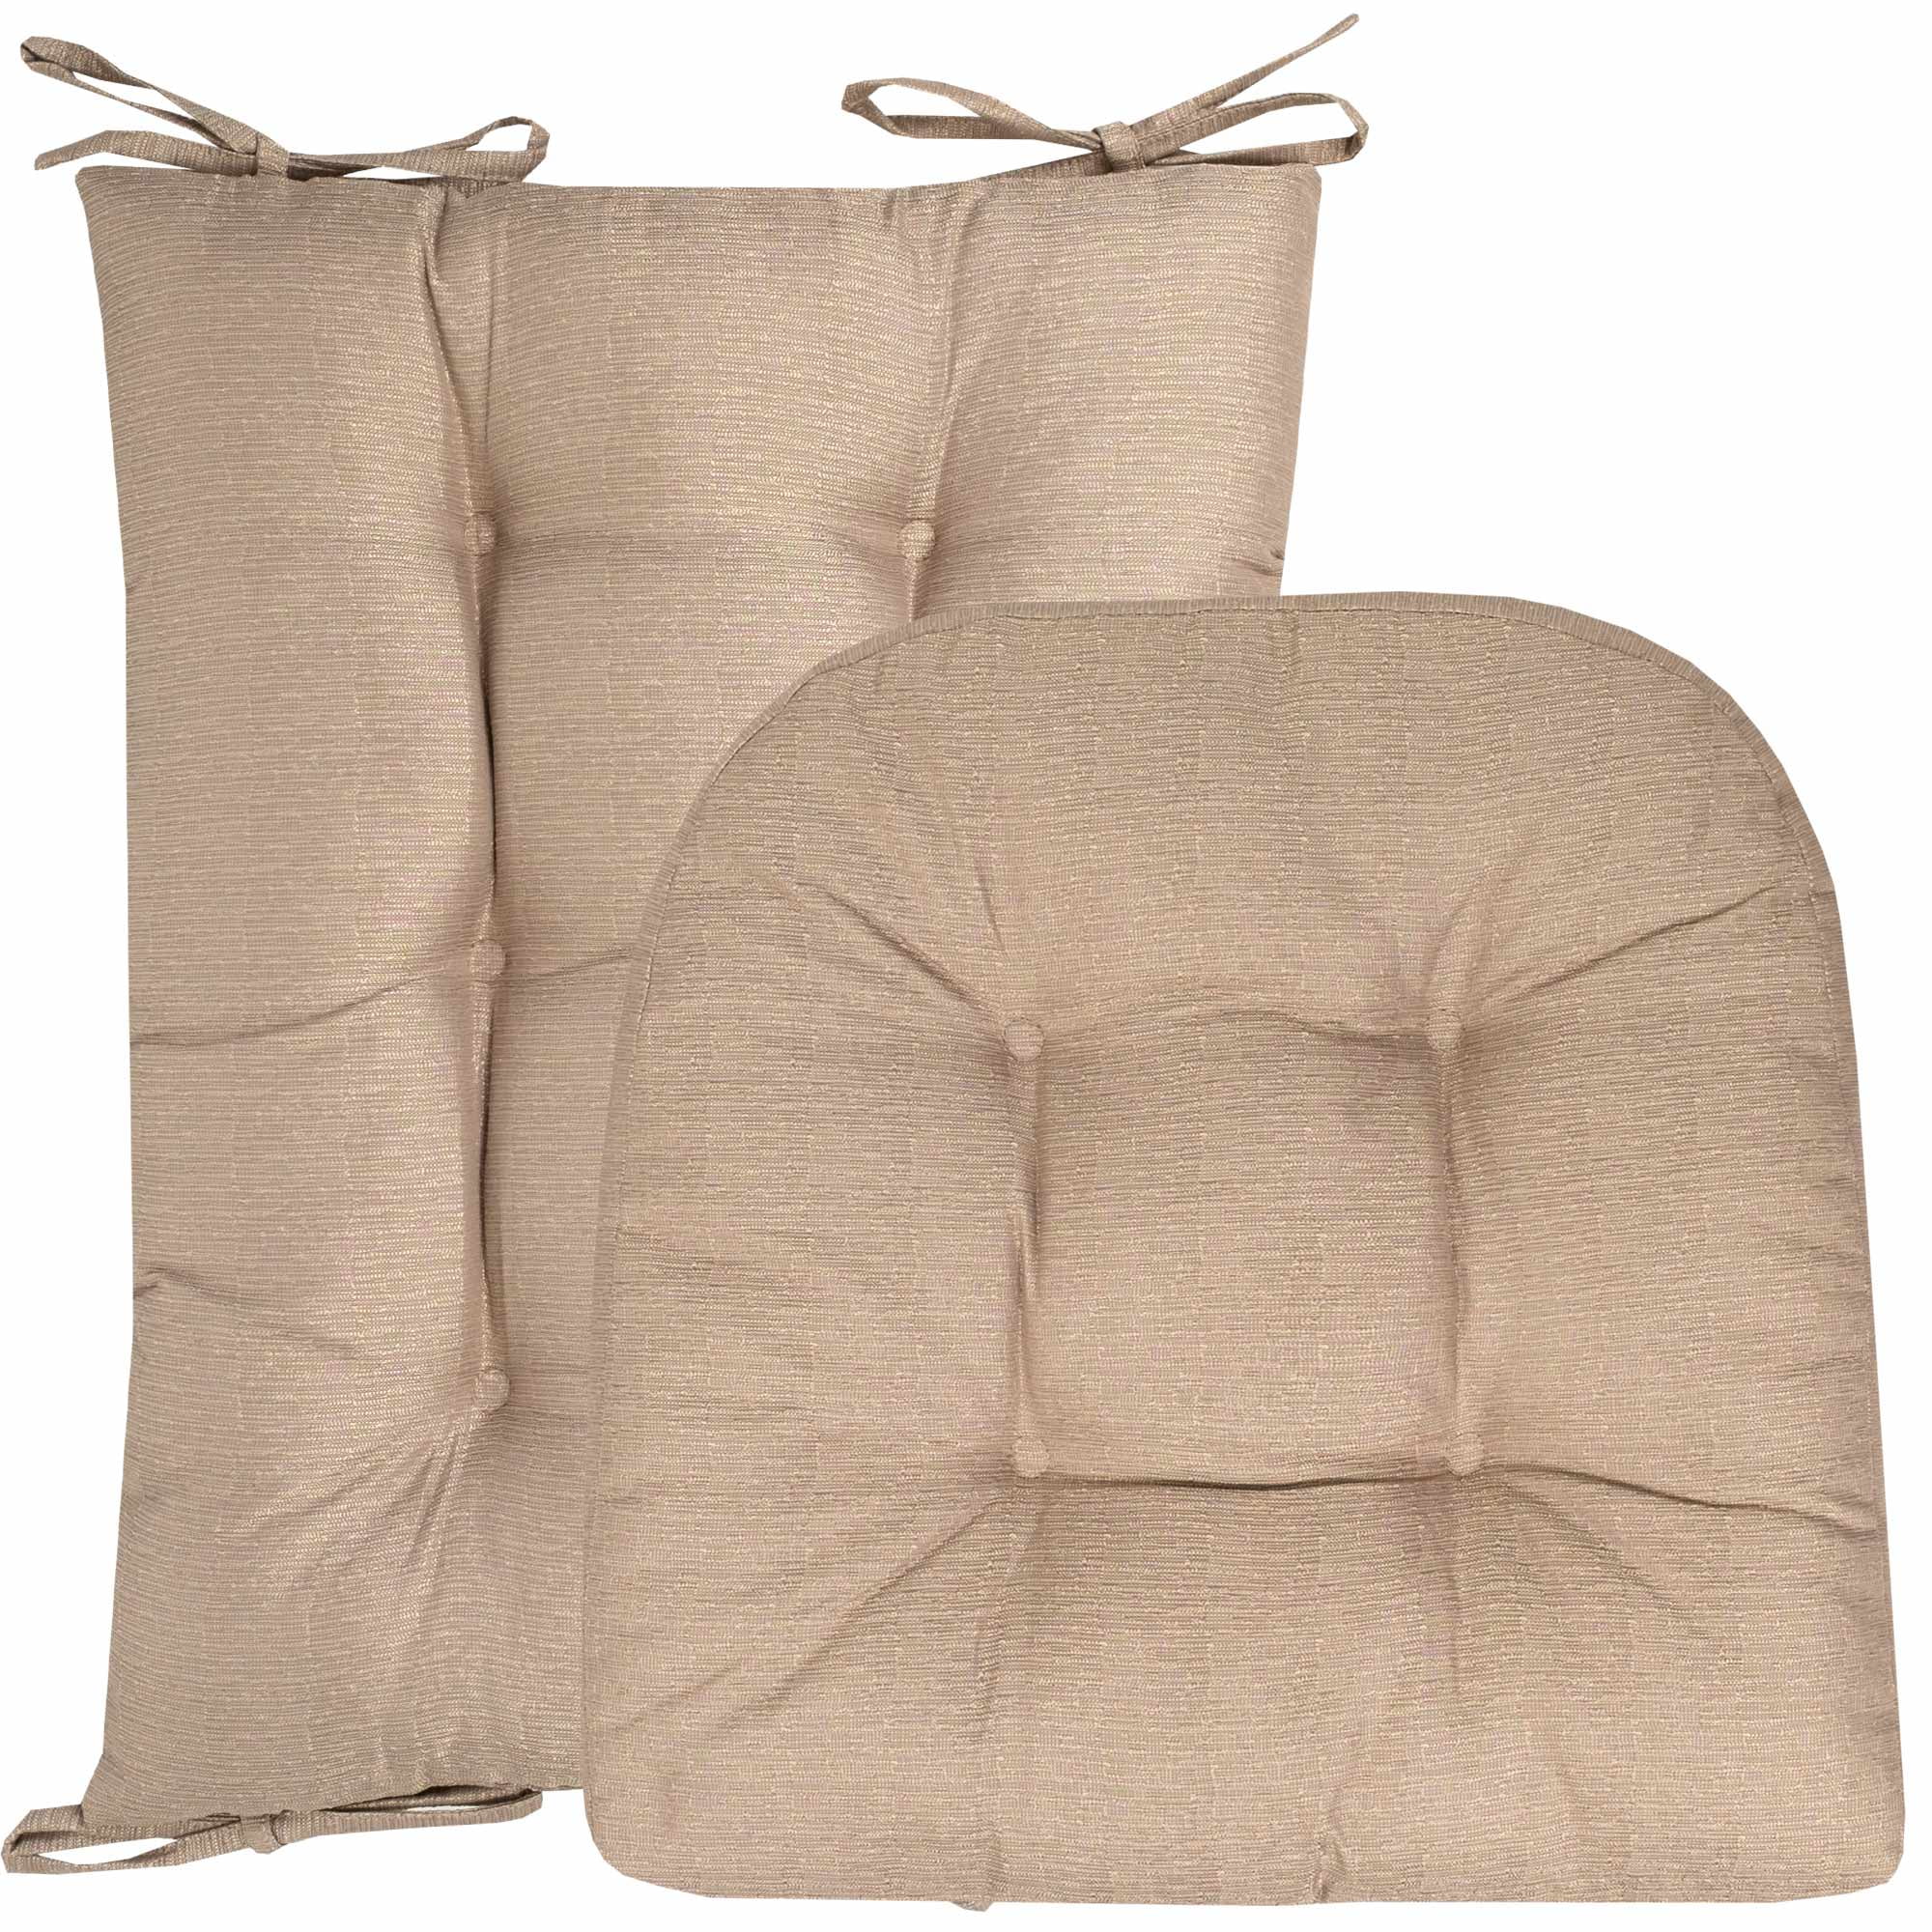 Sweet Home Collection  Memory Foam Tufted Chair Cushion Non Slip Rubber  Back, Taupe, 6 PK, 6PK - King Soopers